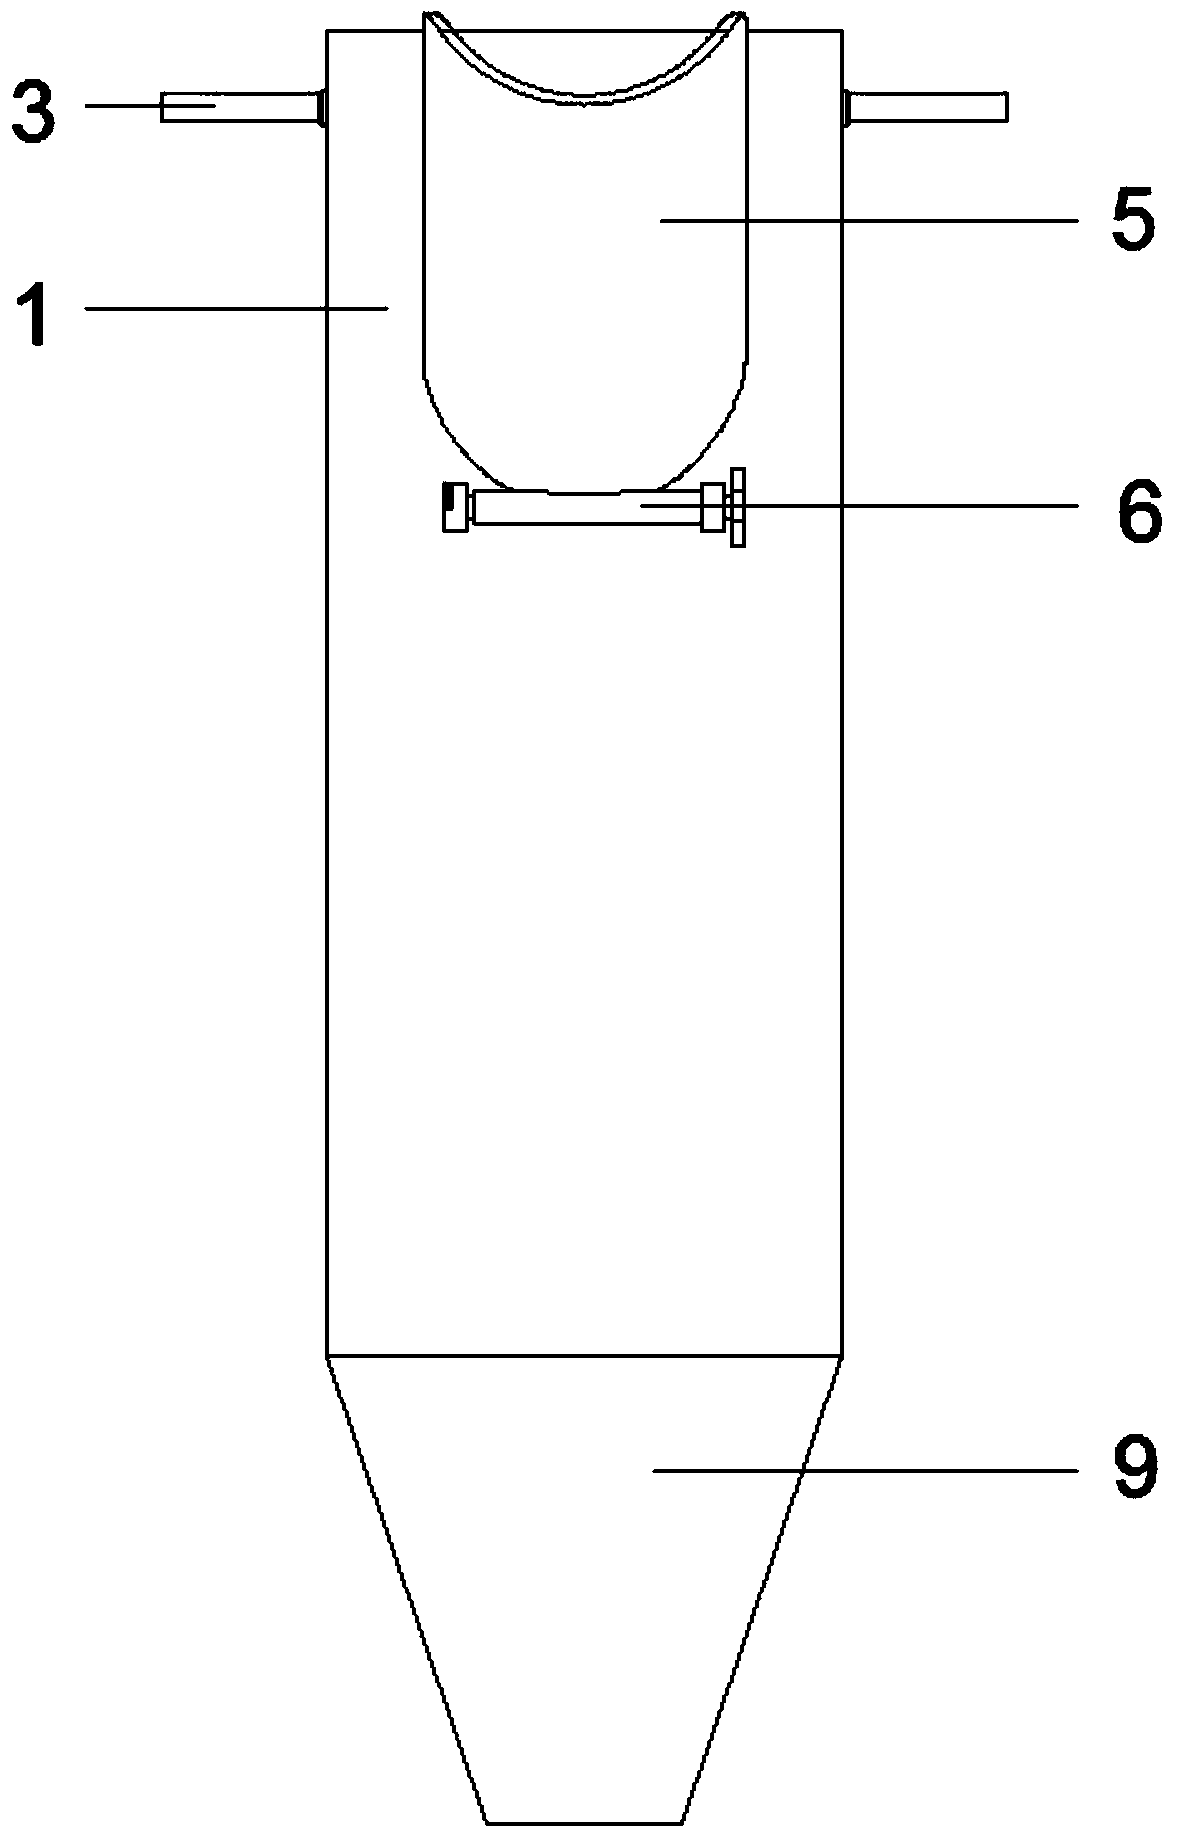 Garlic seed orientation device for garlic sowing